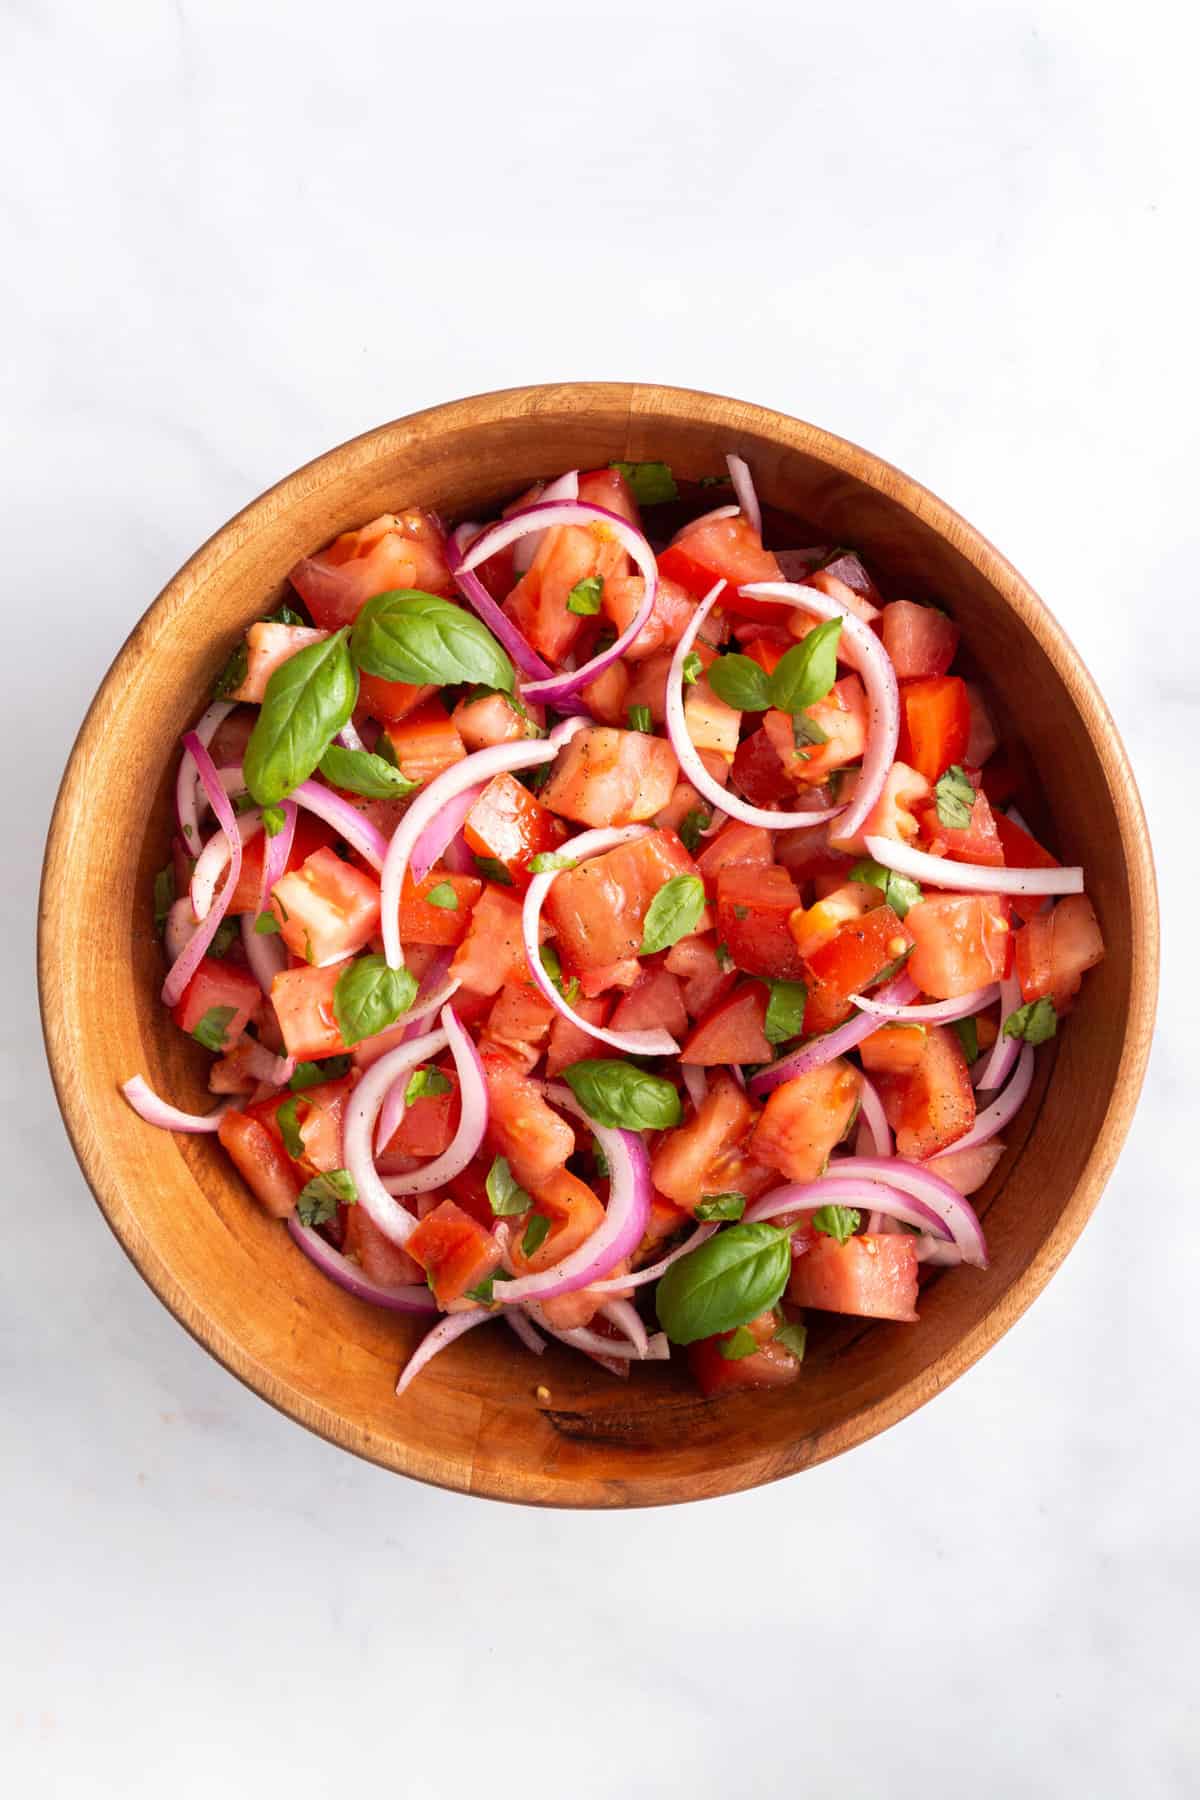 top down image of a wooden bowl with tomato salad